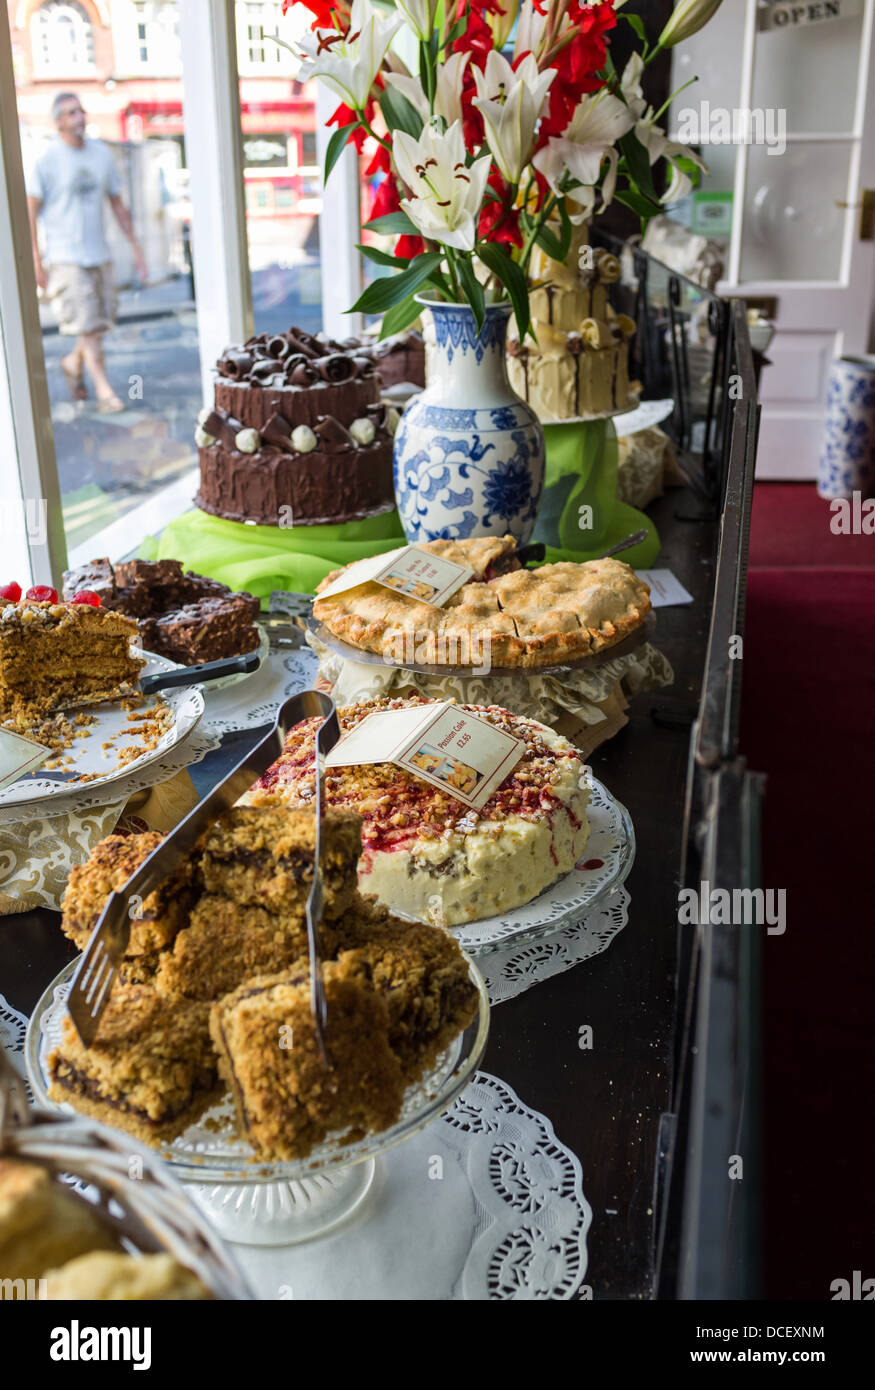 Totnes, Devon, England. August 1st 2013. The Anne of Cleves café in Totnes showing a selection of cakes in the window display. Stock Photo